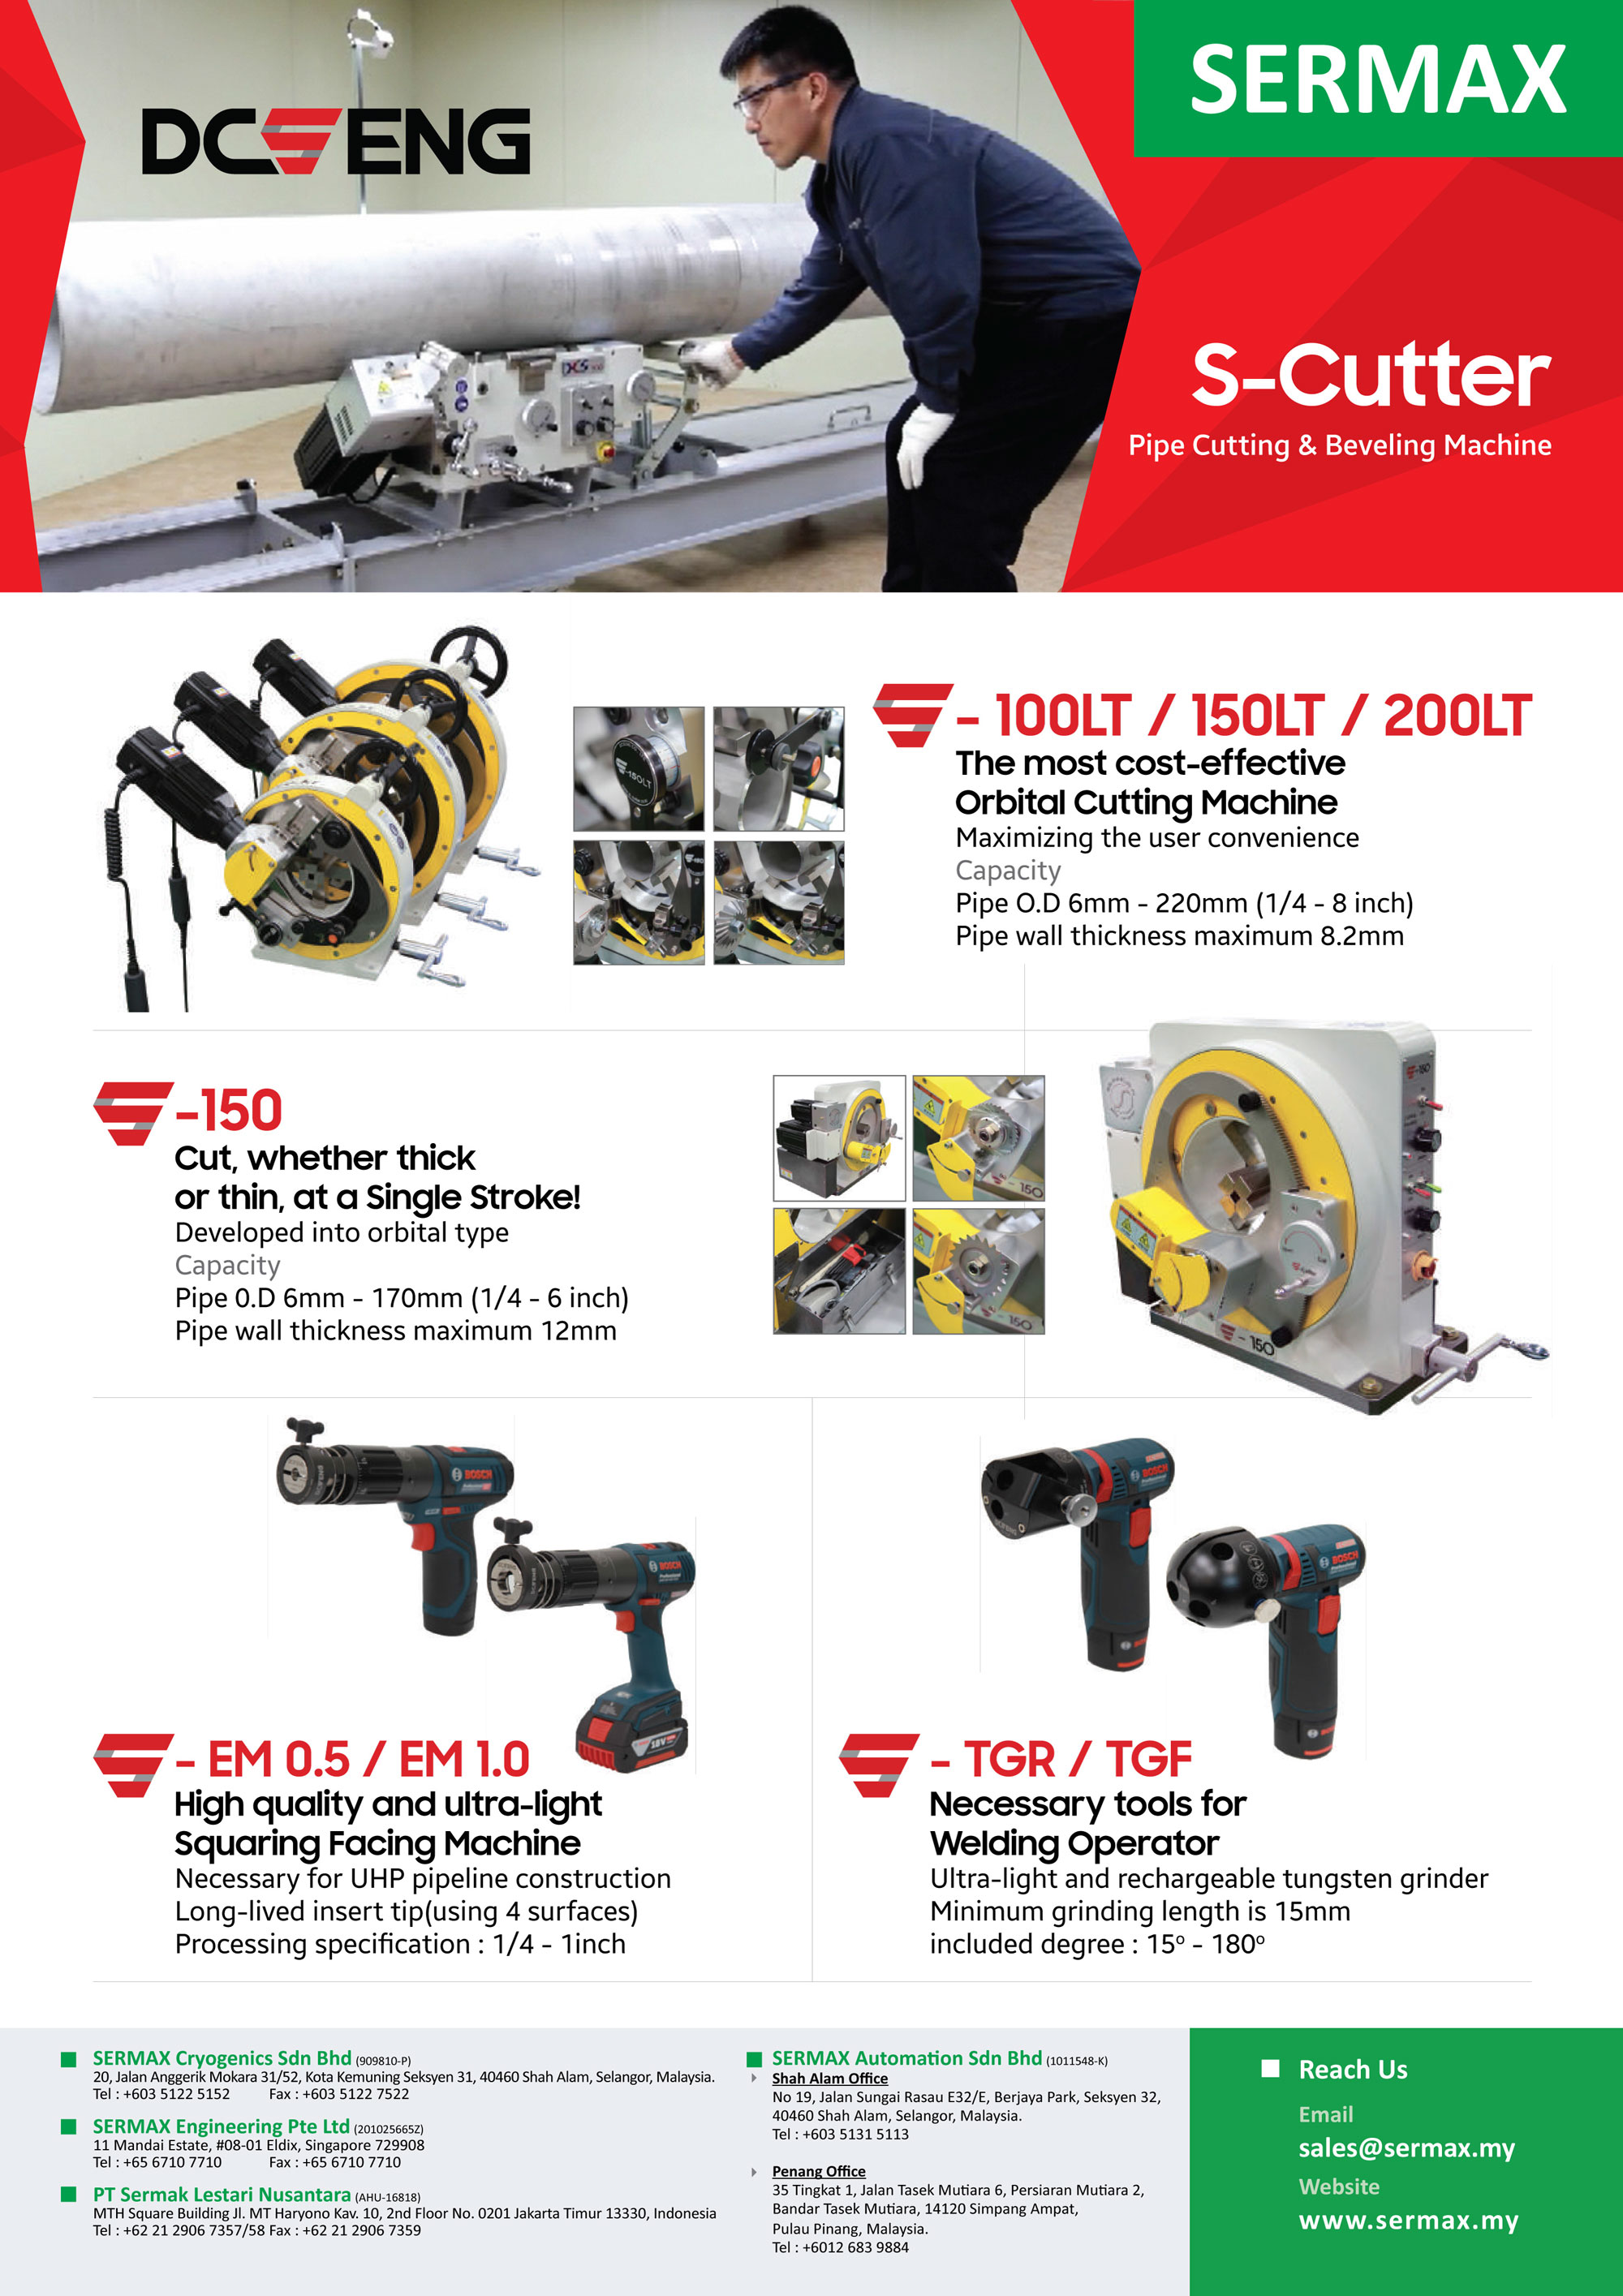 DCSeng S-Cutter products available in Malaysia - Sermax is proud to inform that we are now the official distributor for DCSeng S-Cutter in Malaysia.